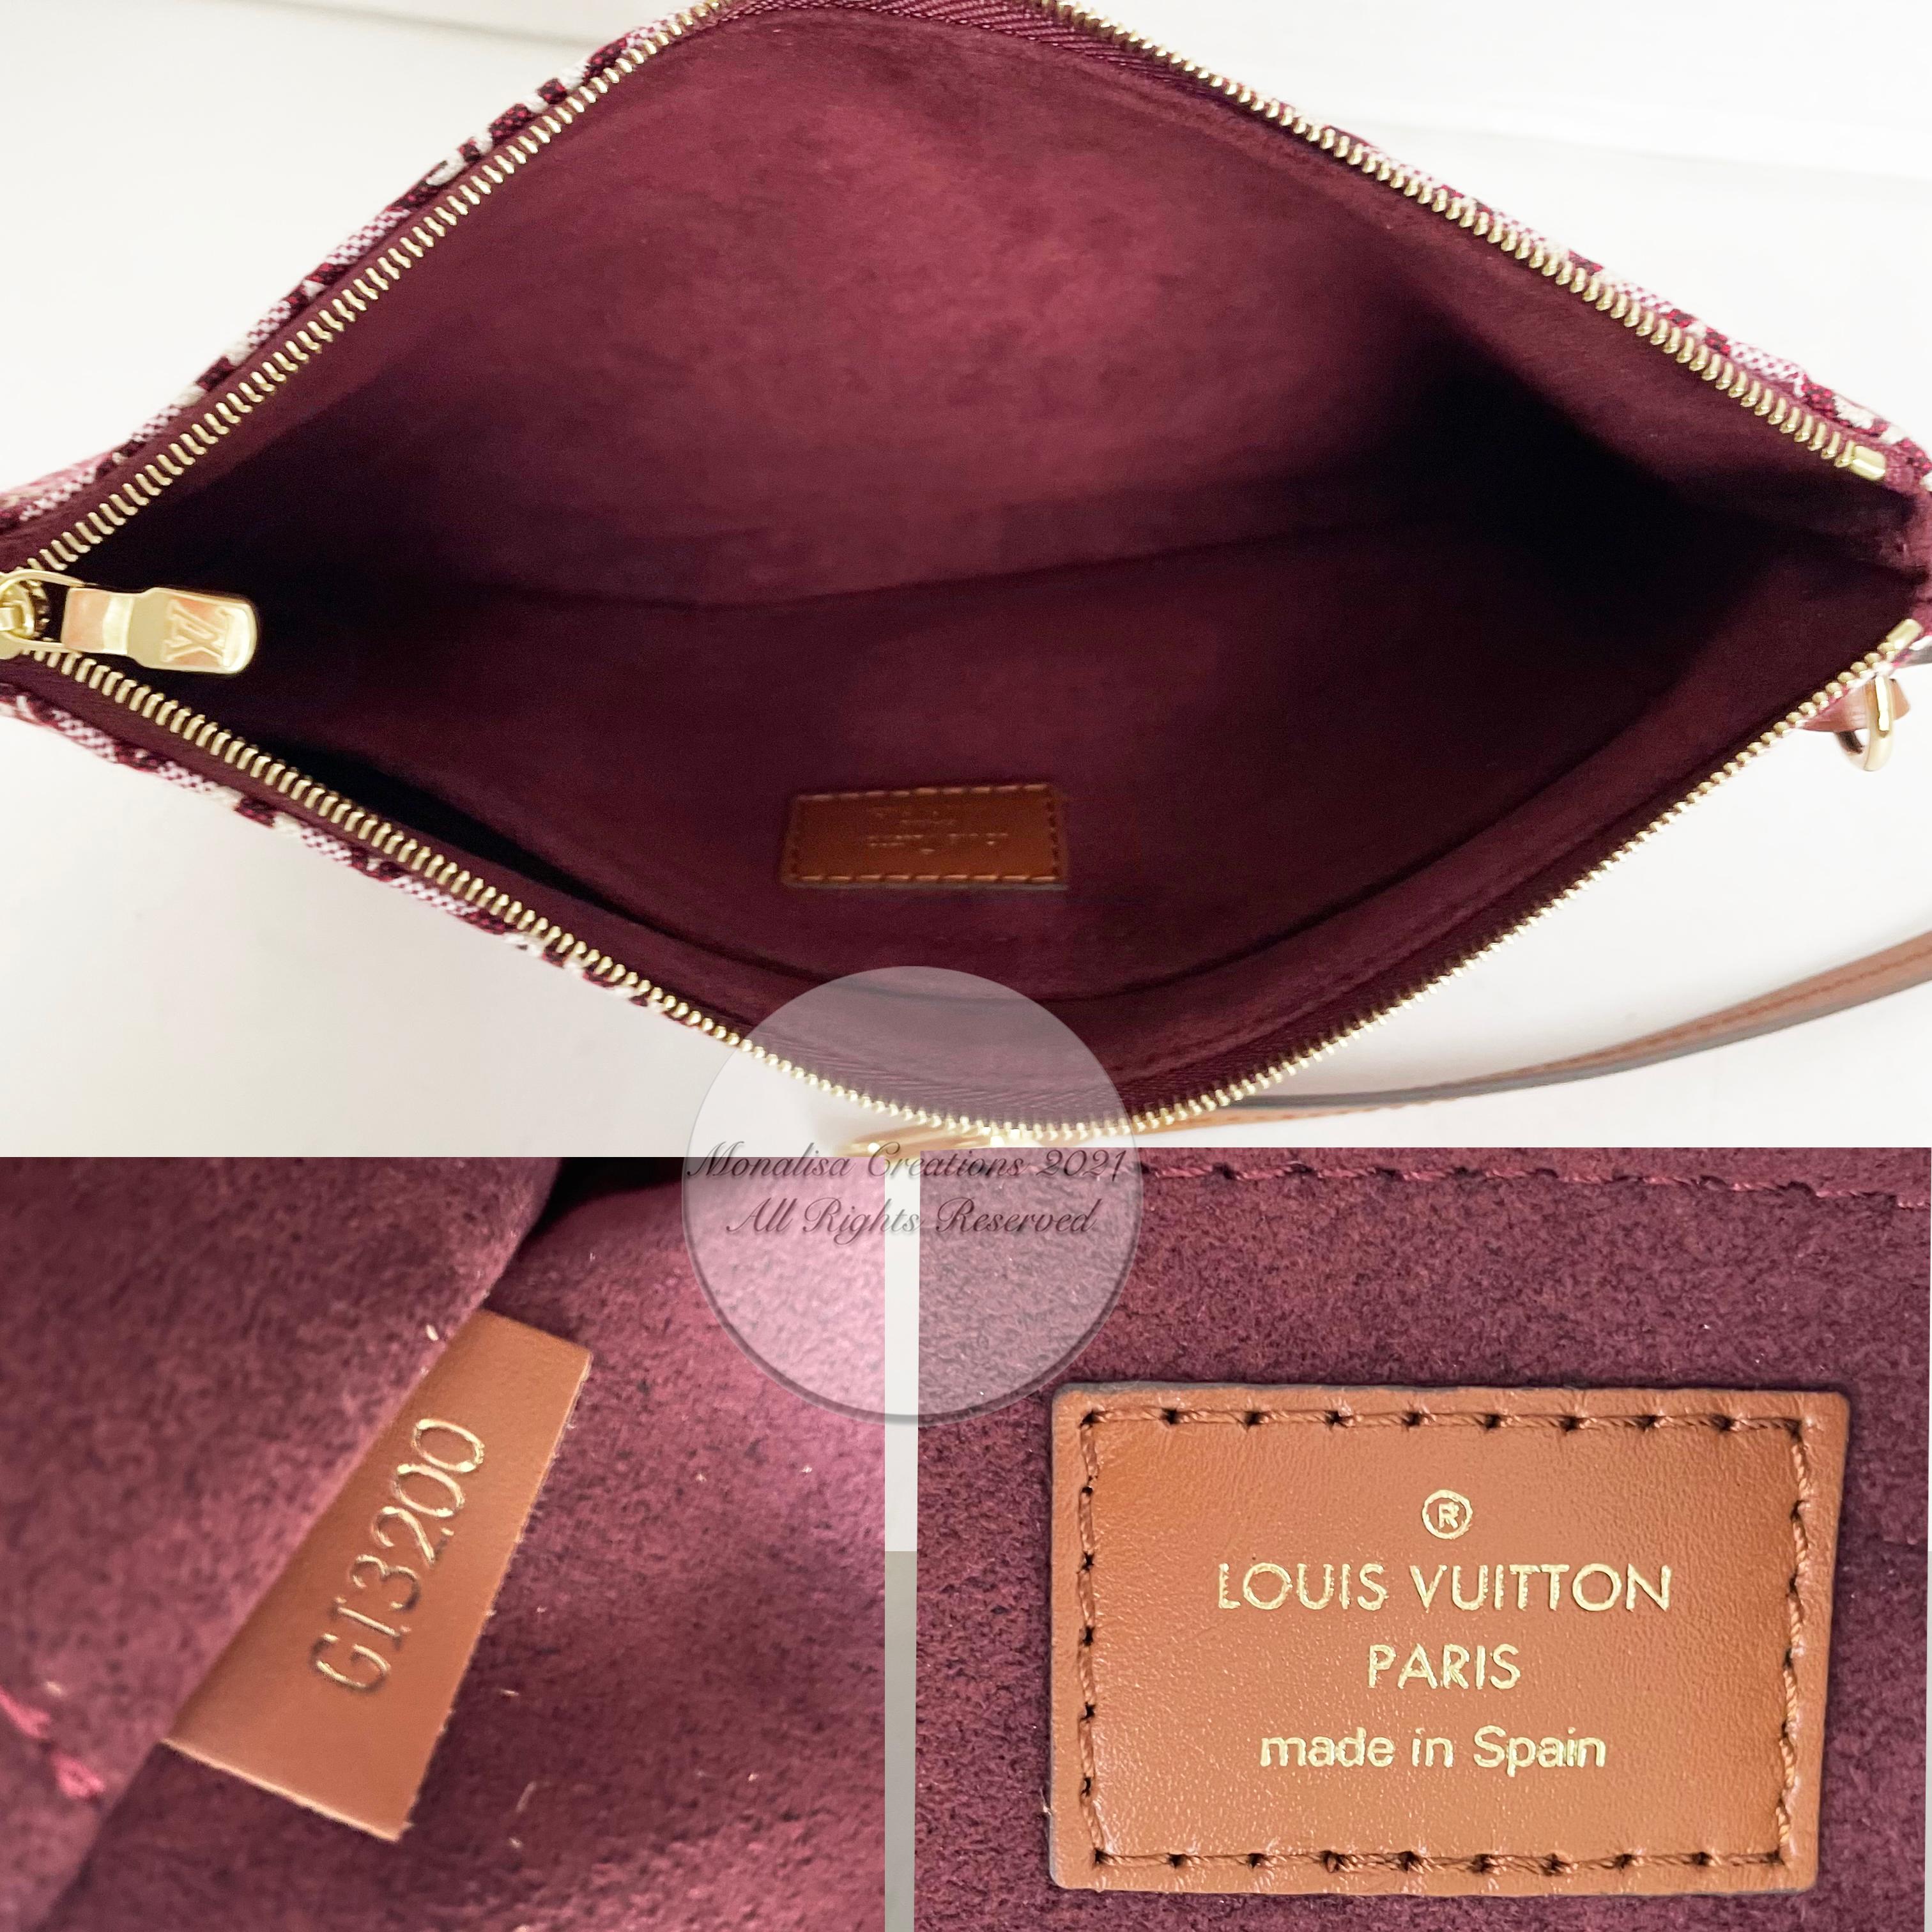 Louis Vuitton Since 1854 Neverfull Tote Bag Bordeaux + Removable Pouch in Box  11